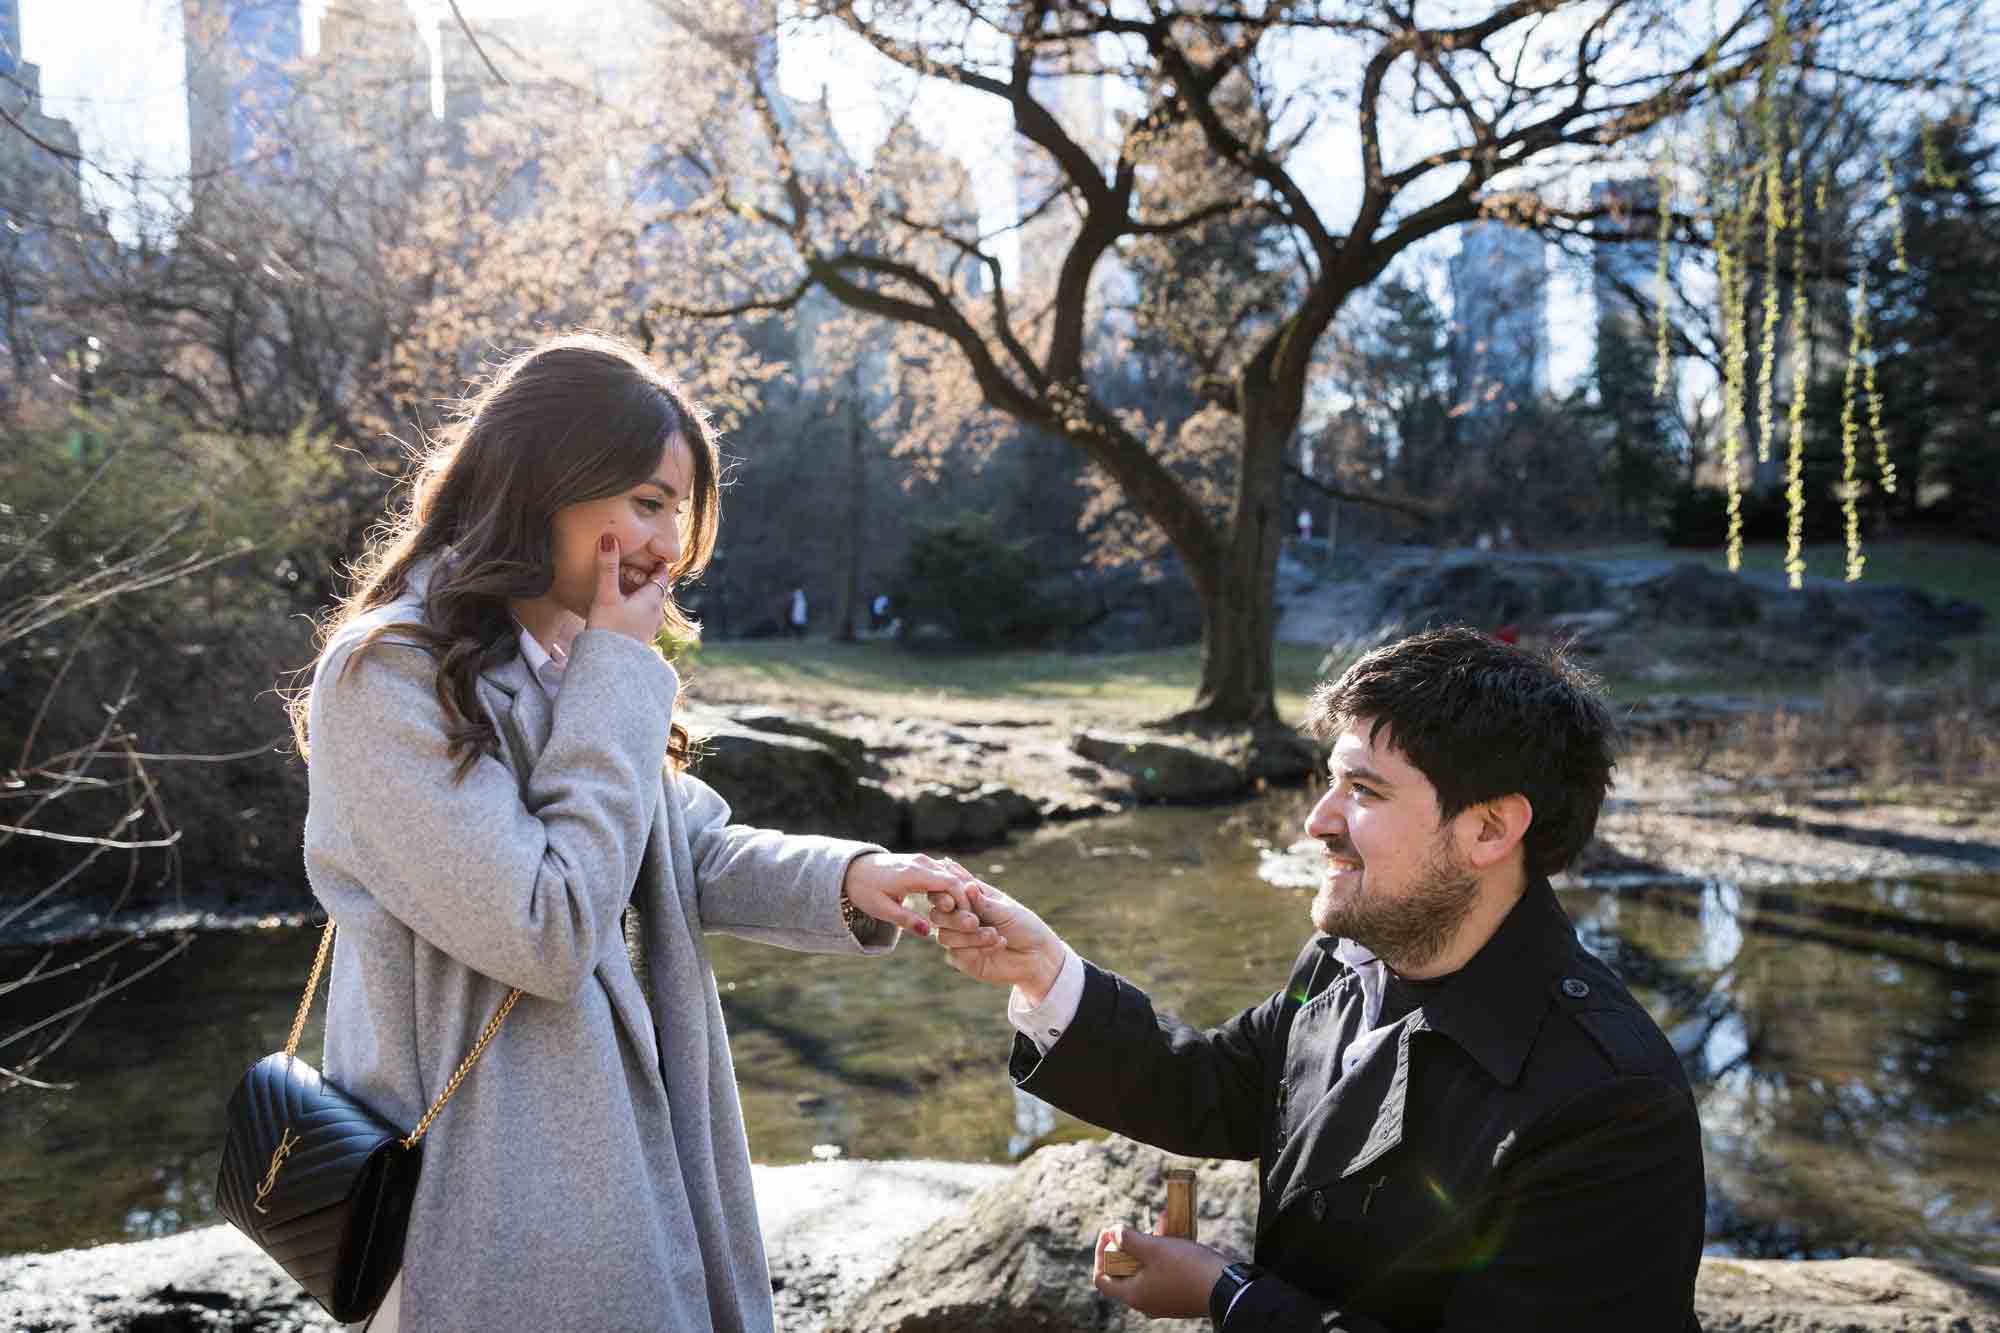 Surprised woman holding man's hand during a Gapstow Bridge surprise proposal in Central Park